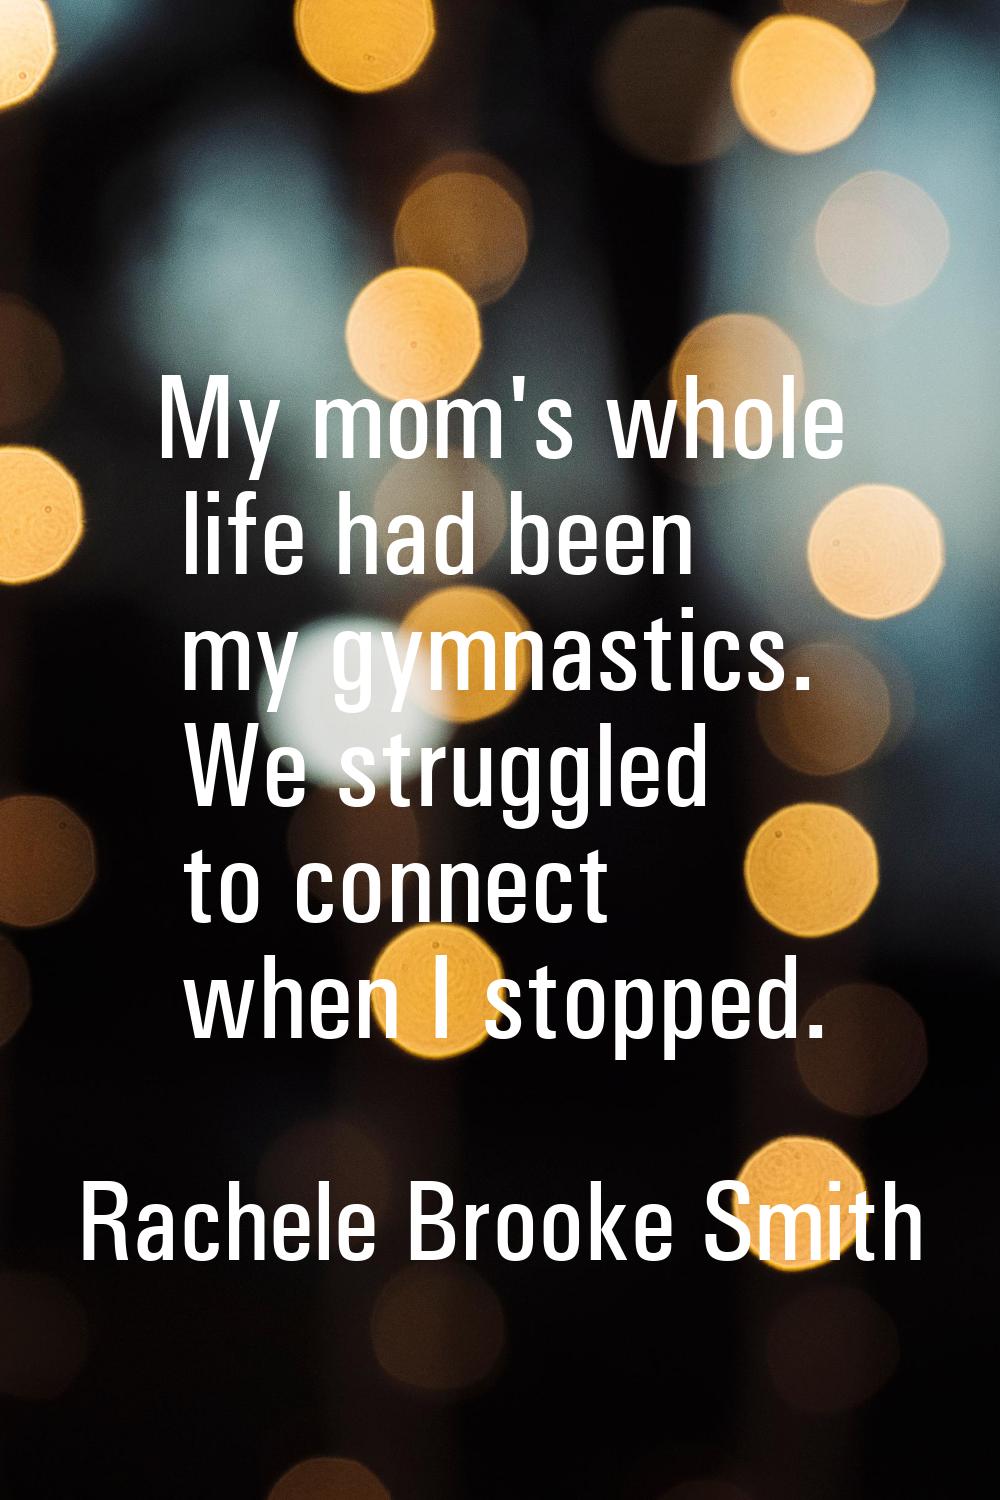 My mom's whole life had been my gymnastics. We struggled to connect when I stopped.